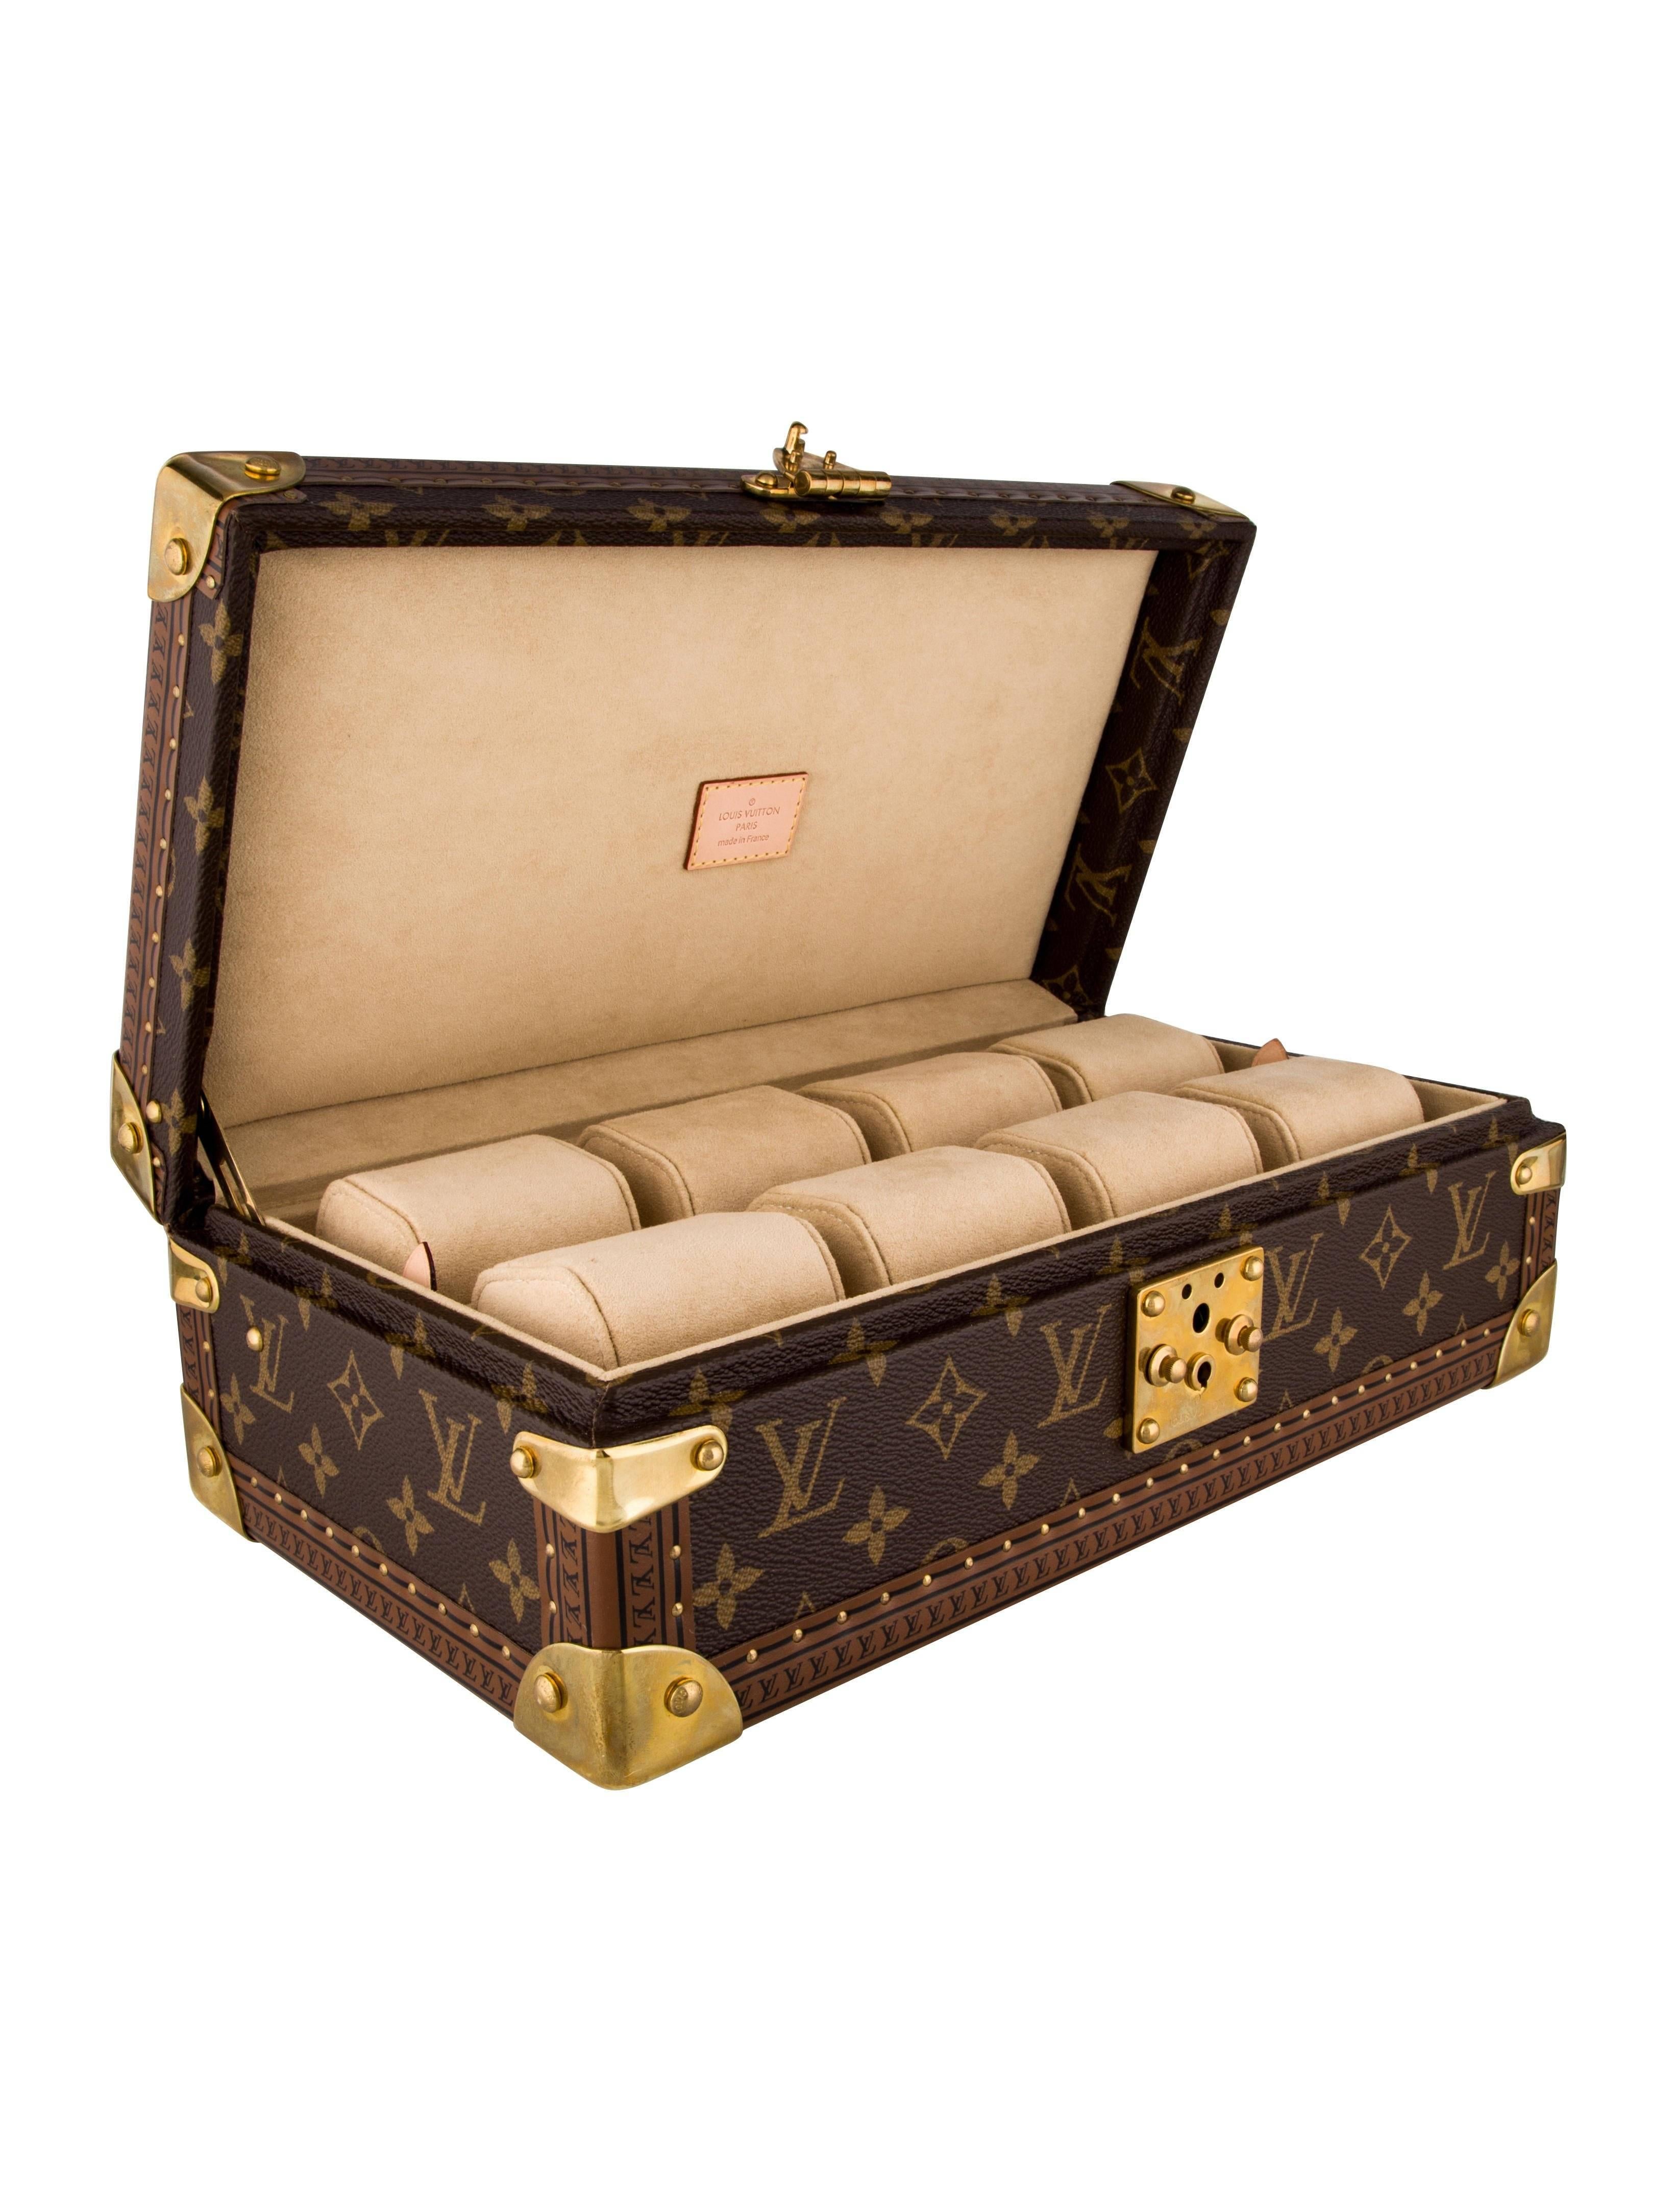 Louis Vuitton Watch Case - 5 For Sale on 1stDibs